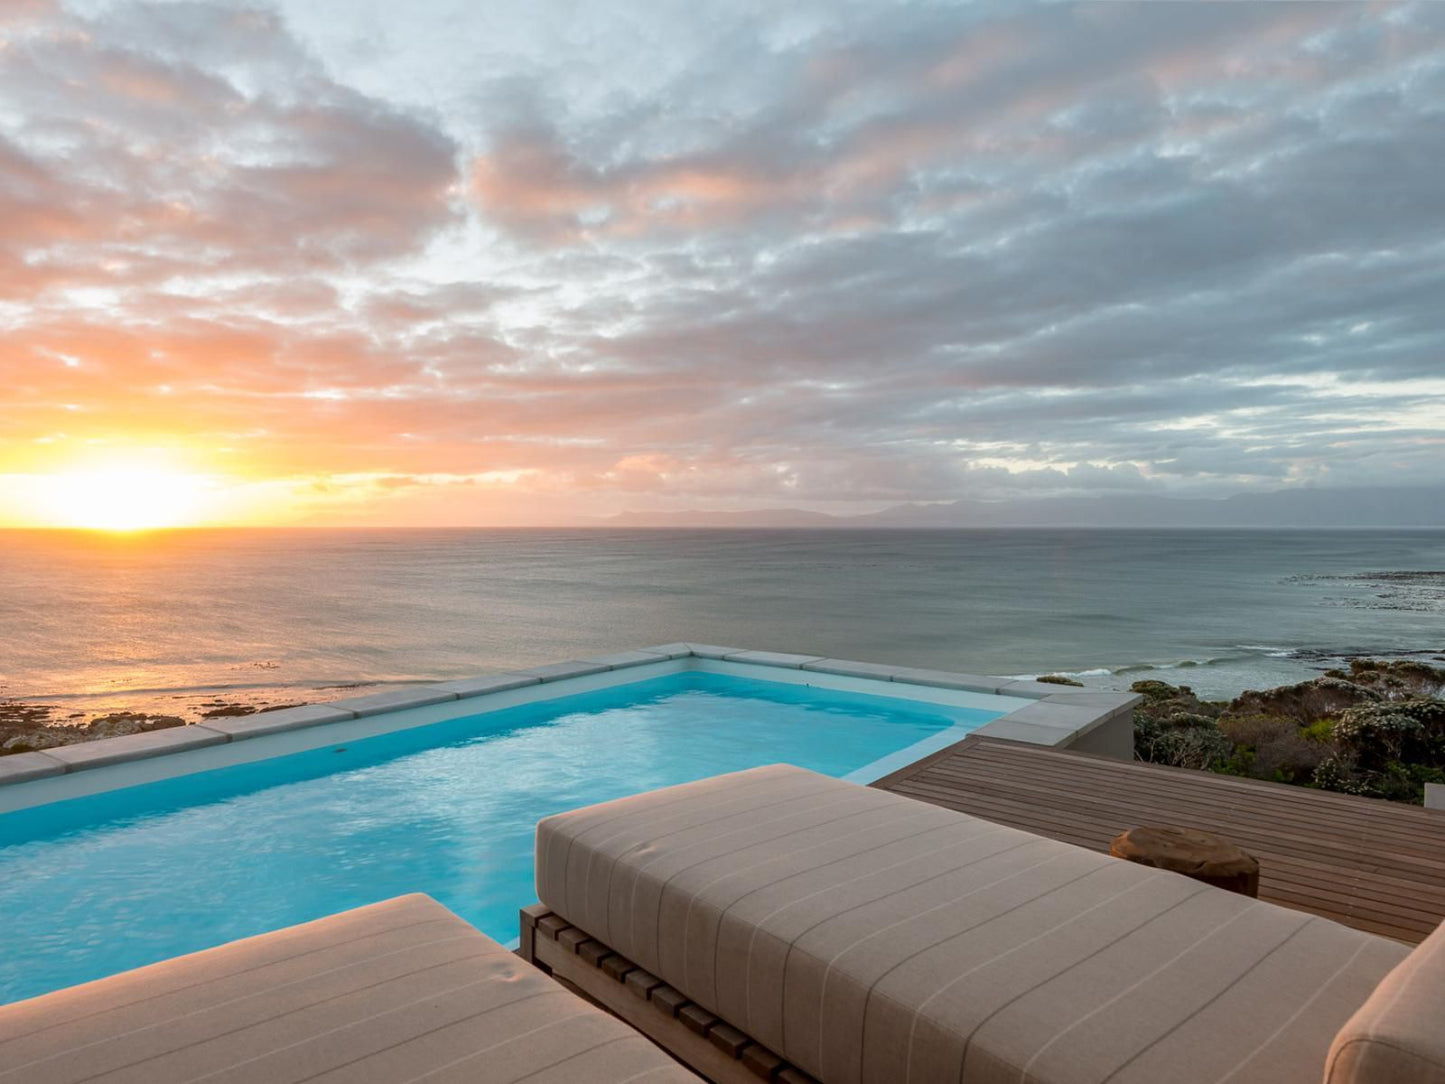 Romansbaai Collection Gansbaai Western Cape South Africa Beach, Nature, Sand, Ocean, Waters, Sunset, Sky, Swimming Pool